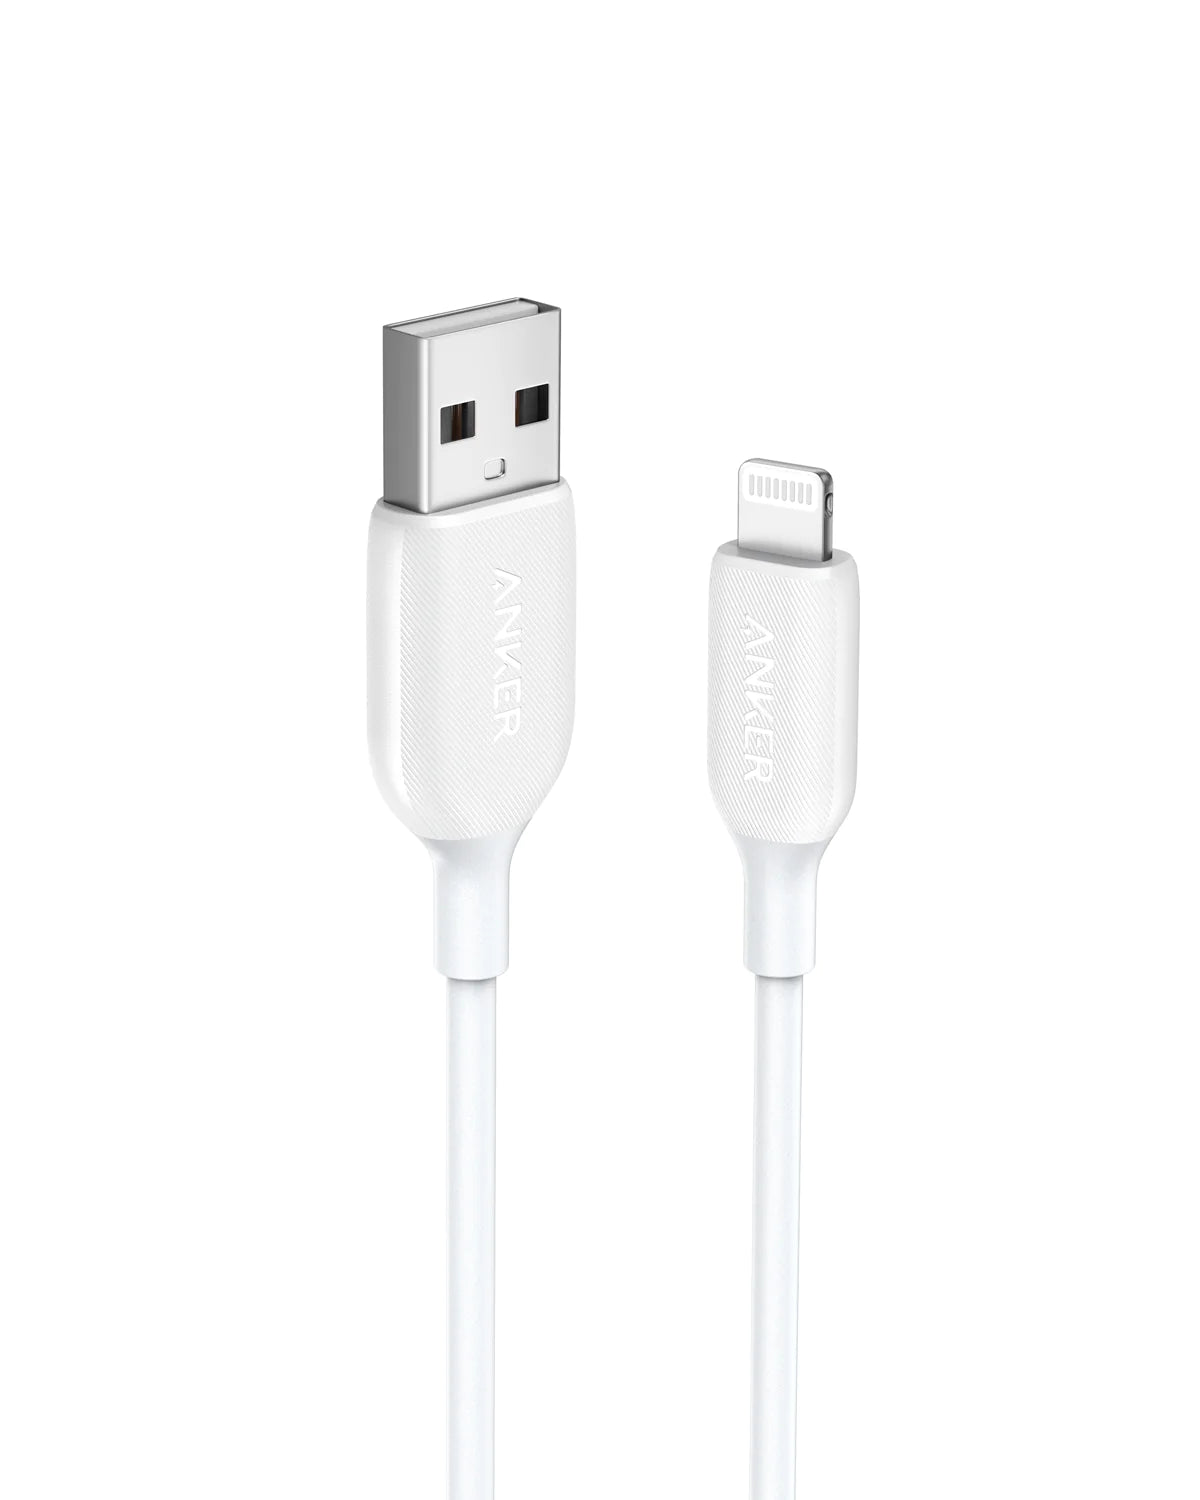 Anker PowerLine III 3ft Lightning Cable